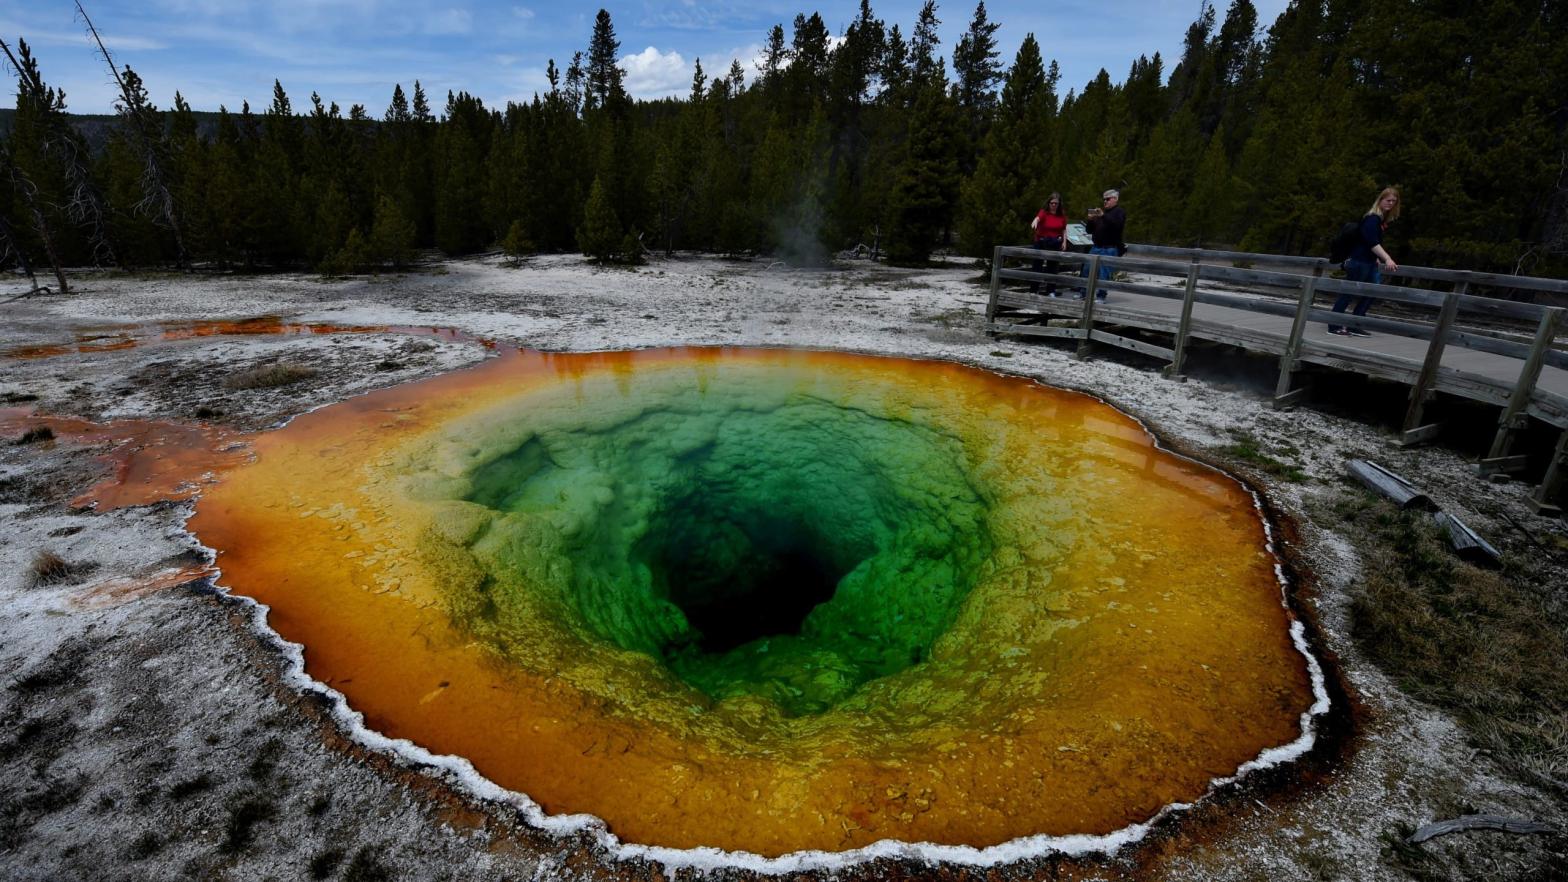 Tourists view the Morning Glory hot spring in the Upper Geyser Basin of Yellowstone National Park in Wyoming. (Photo: Mark Ralston/AFP, Getty Images)